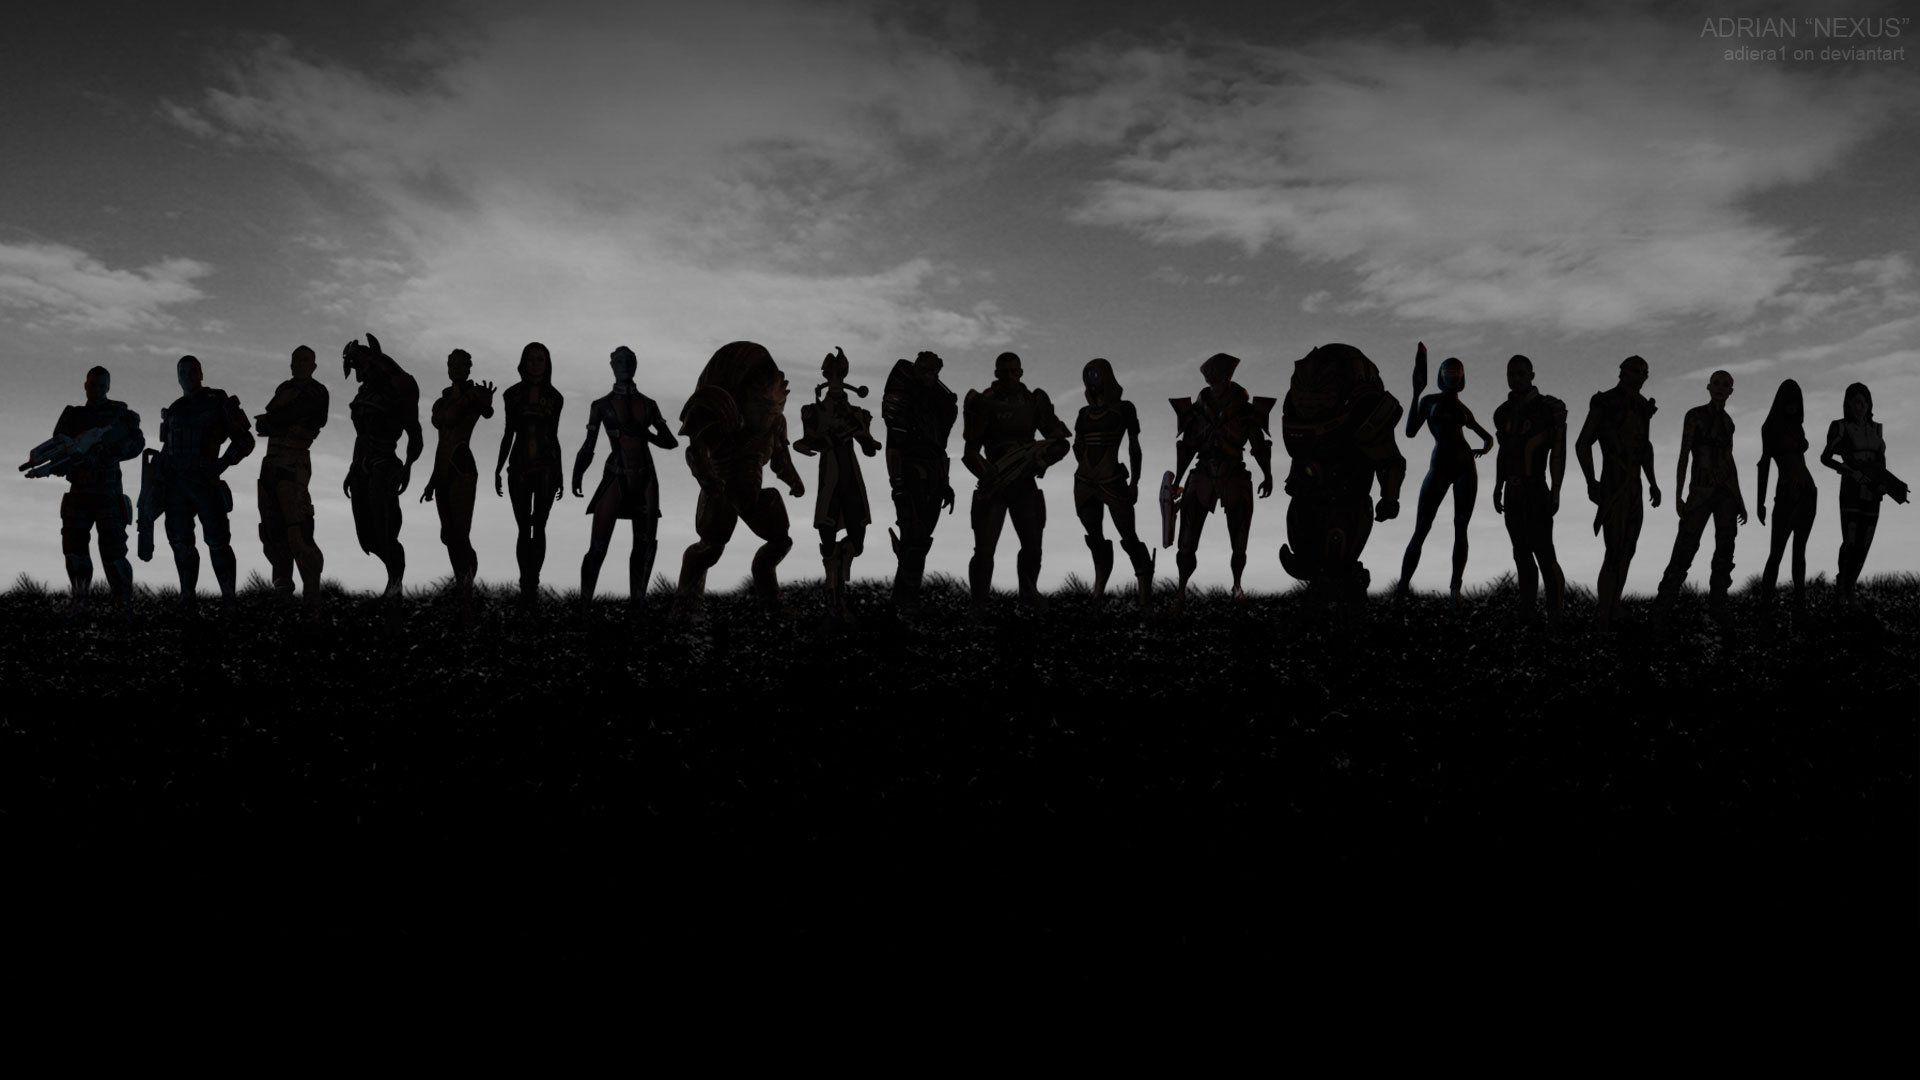 TV Show Band Of Brothers wallpaper Desktop, Phone, Tablet